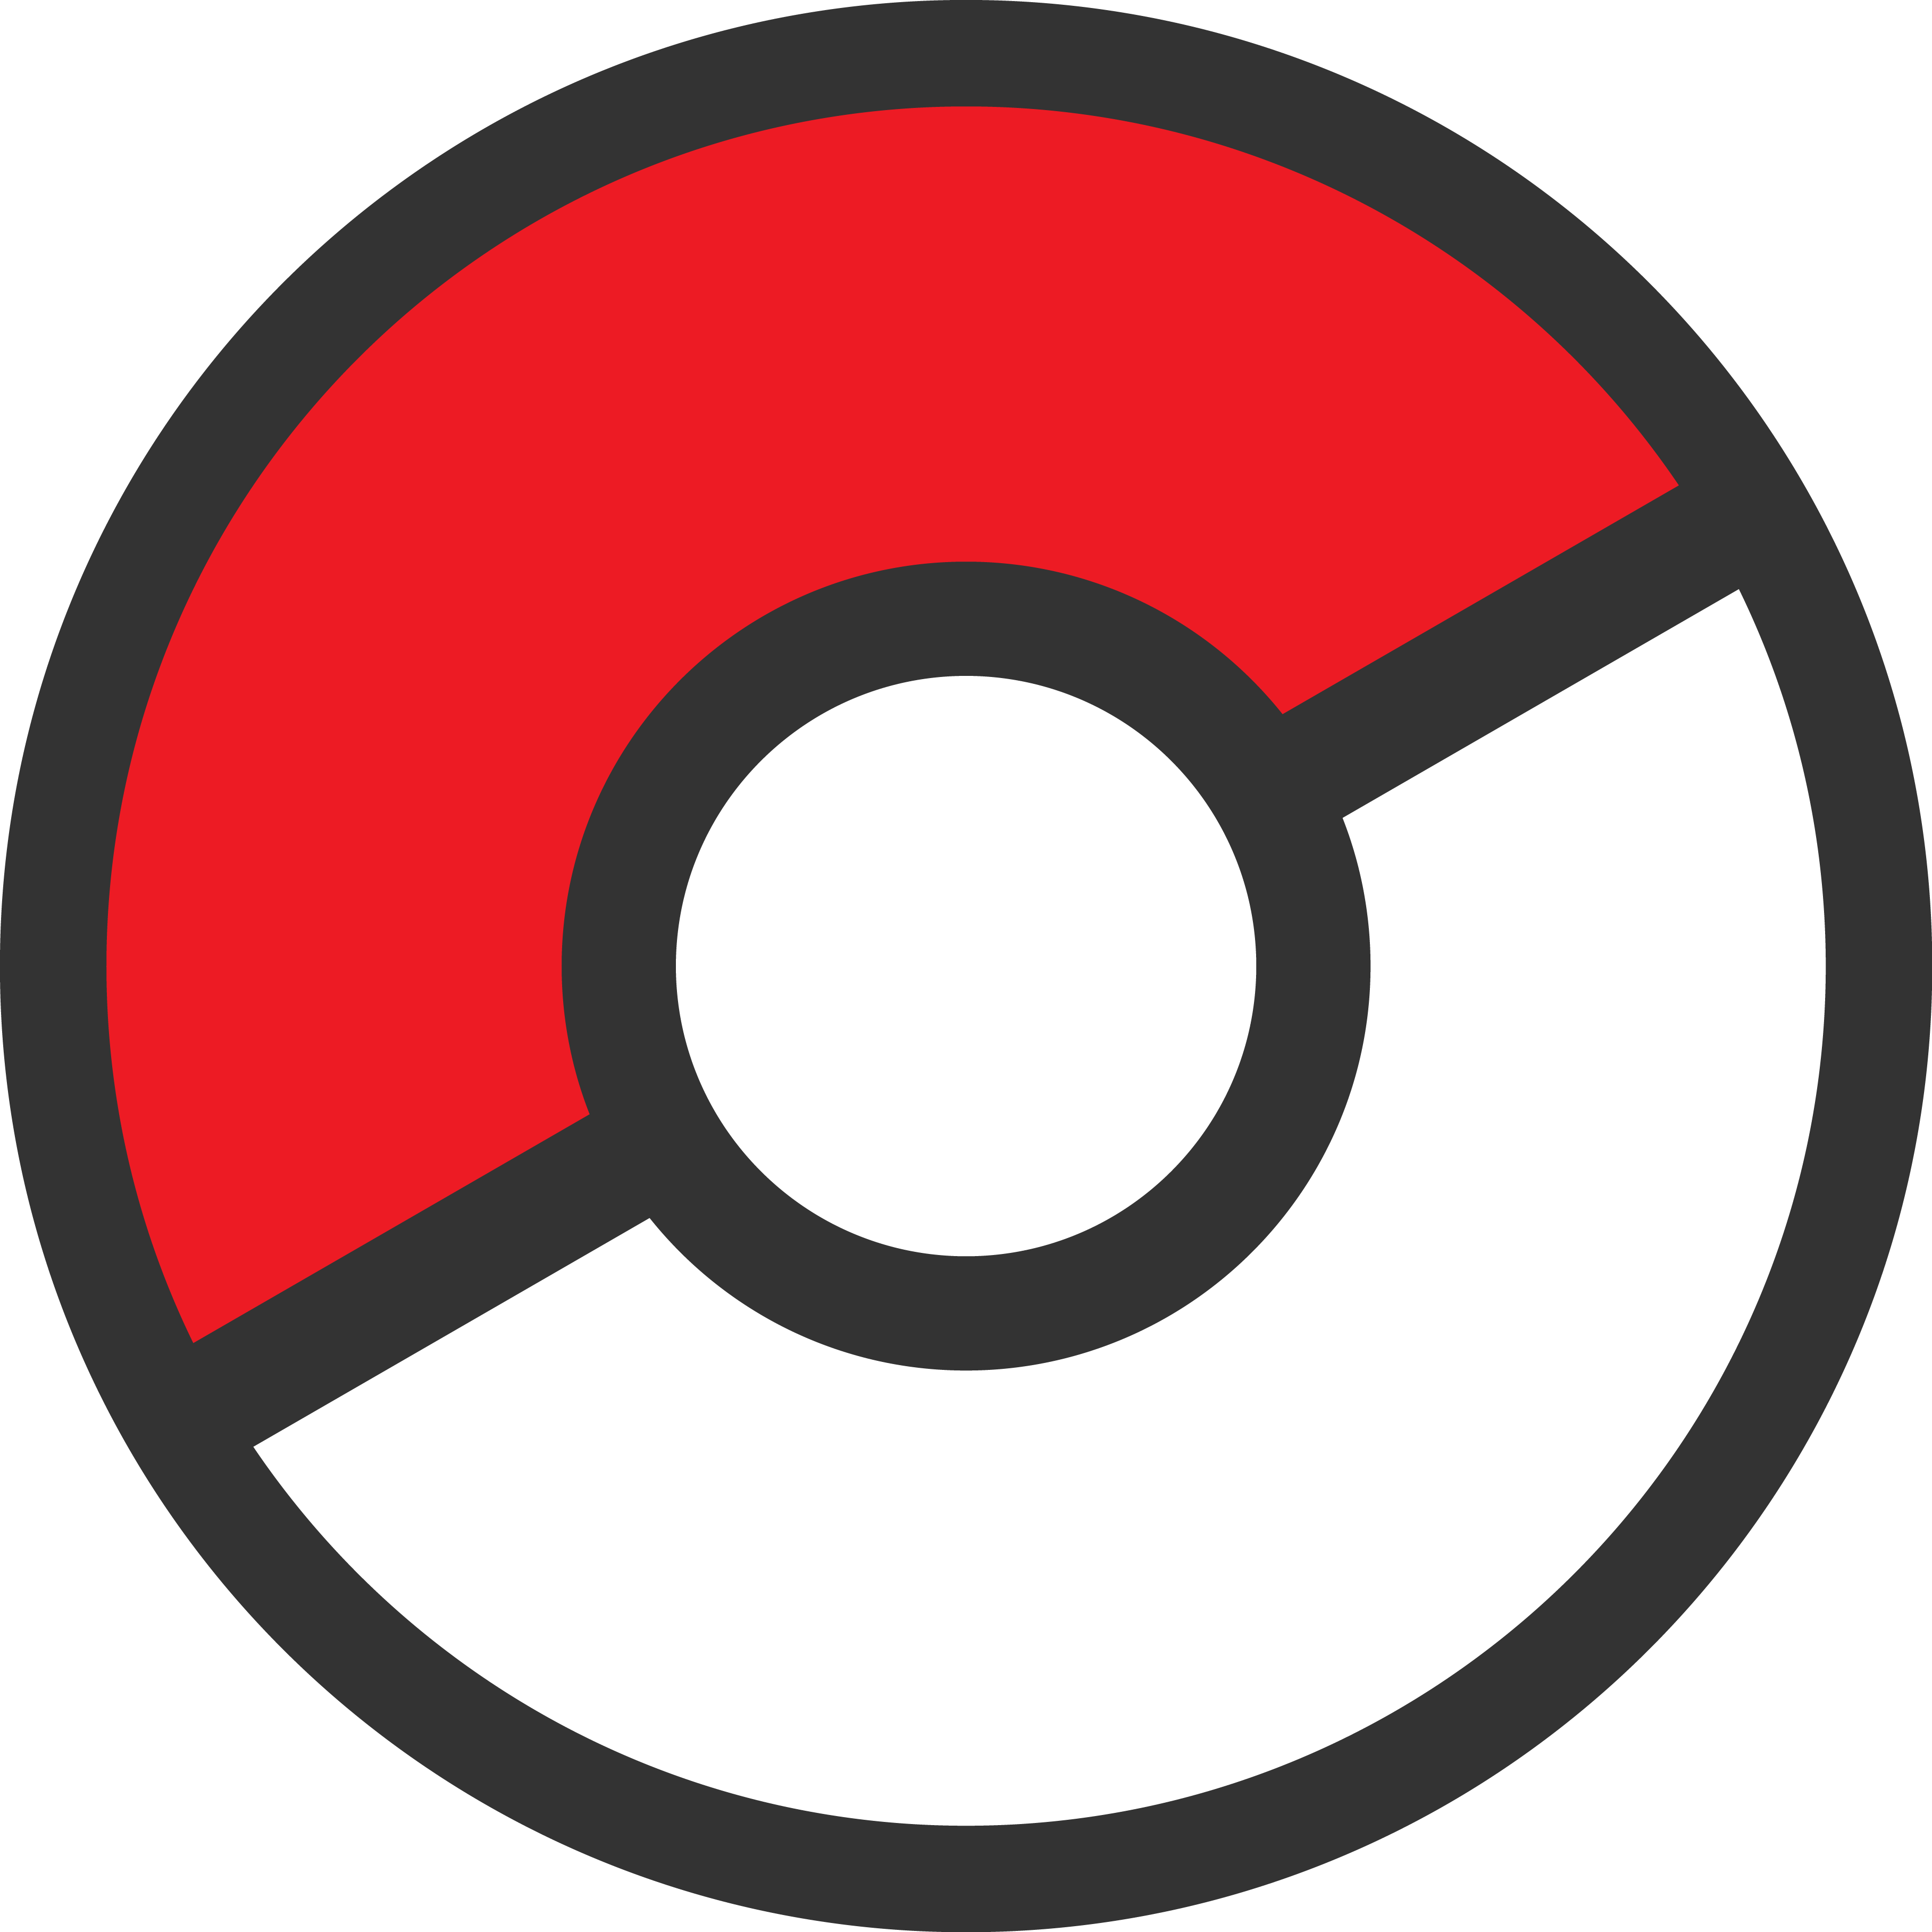 Pokeball clipart, Pokeball Transparent FREE for download on